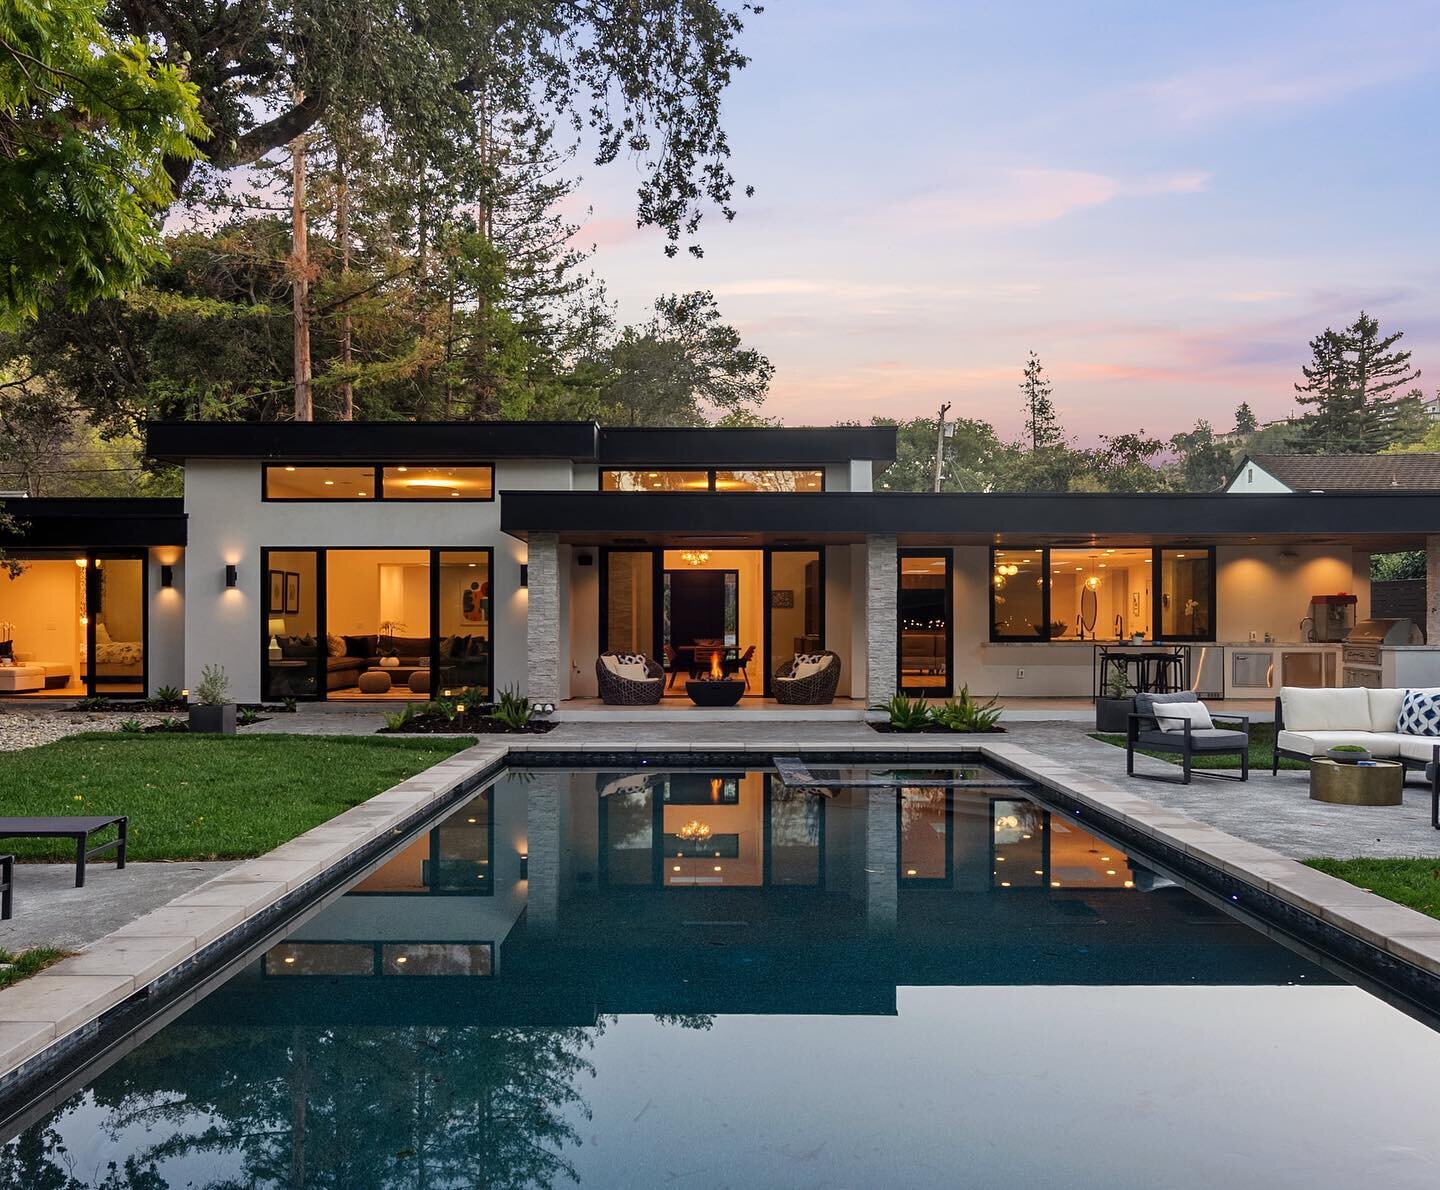 Dulcy Freeman of @goldengatesir has sold Silicon Valley real estate since 2001, guiding countless individuals and families through the real estate process.&nbsp;She represents this exceptional property at 1880 Carmelita Drive, San Carlos, a fantastic